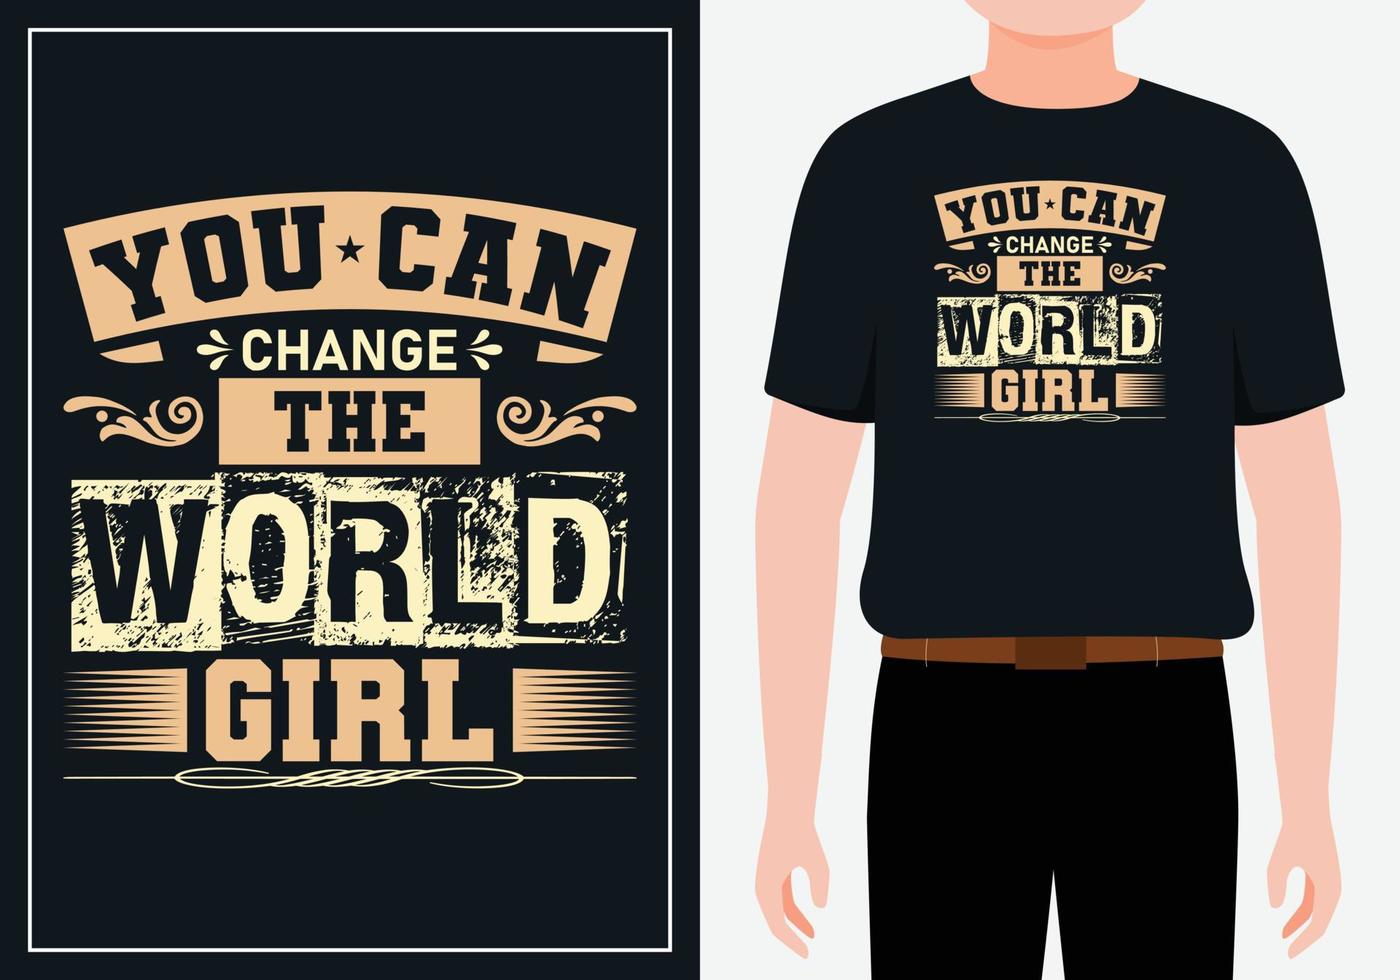 You can change the world girl modern quotes t shirt design Free Vector